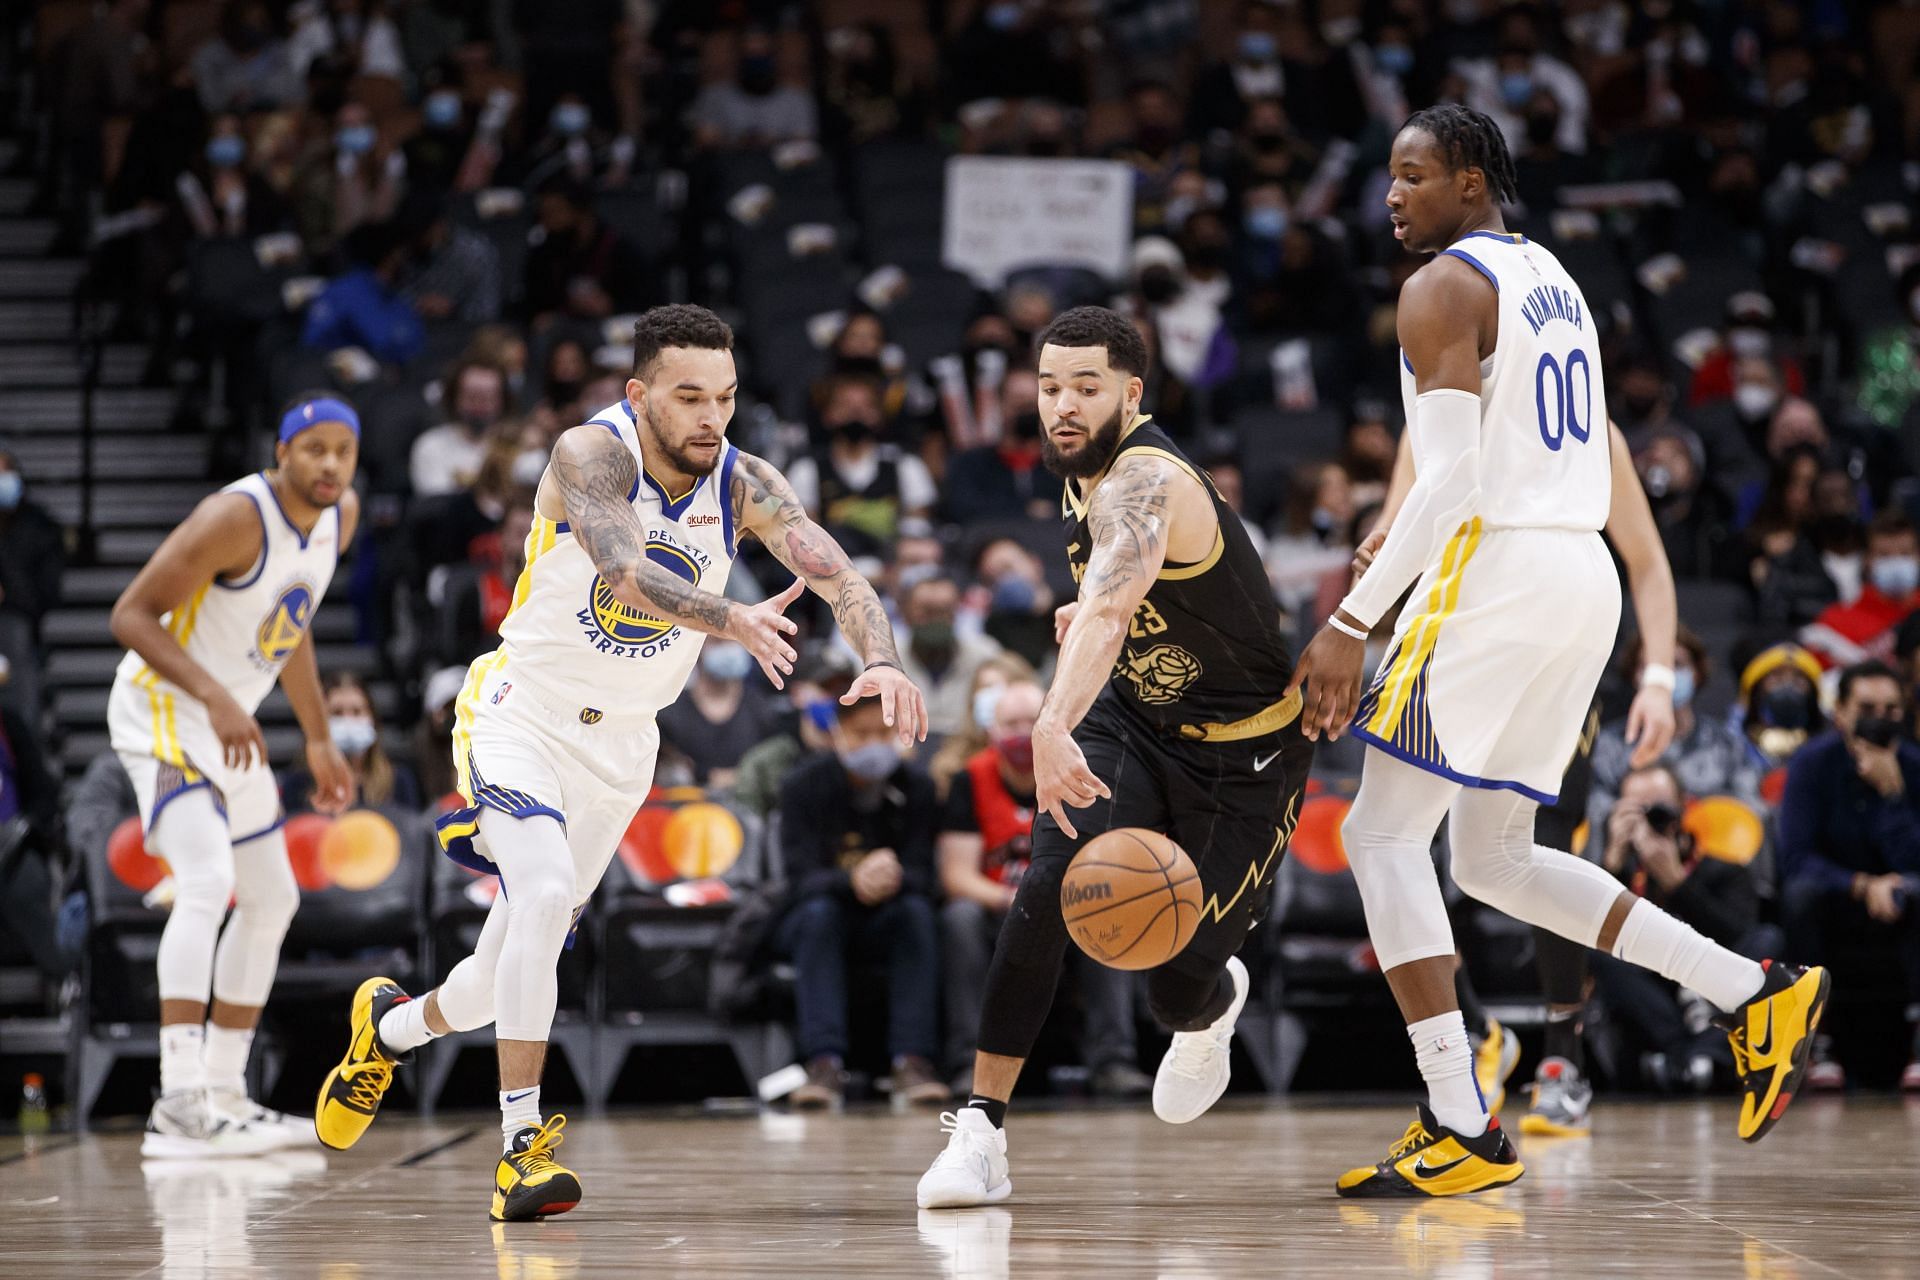 Fred VanVleet shot 6 for 10 from beyond the arc against the Golden State Warriors